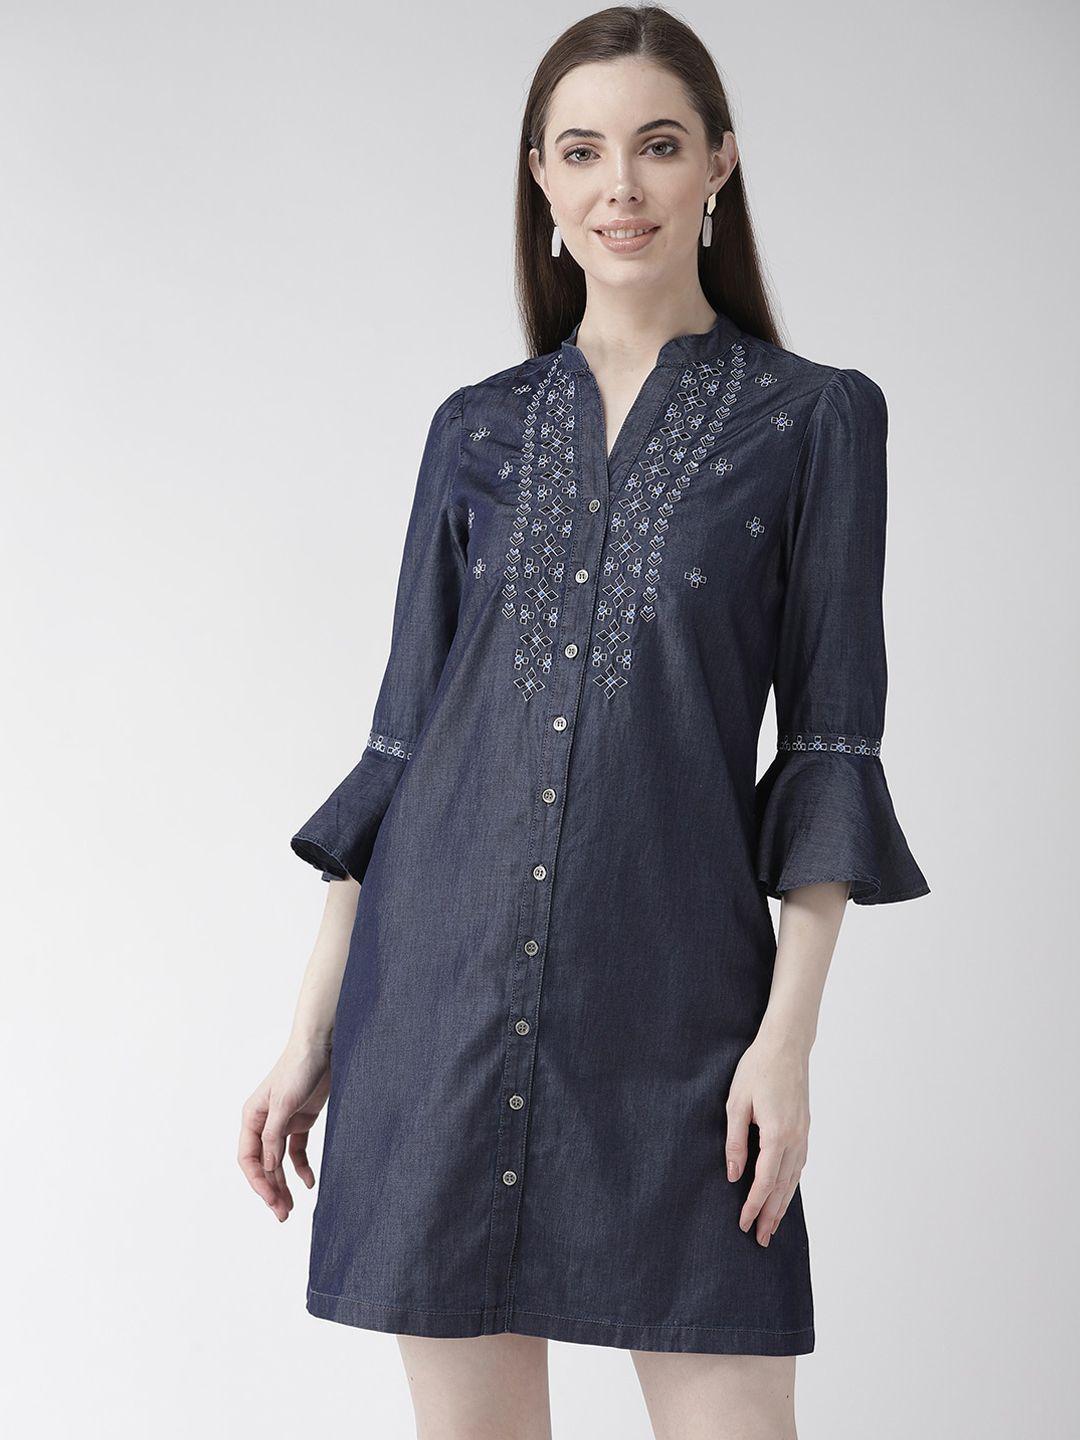 xpose navy blue ethnic motifs embroidered cotton a-line dress